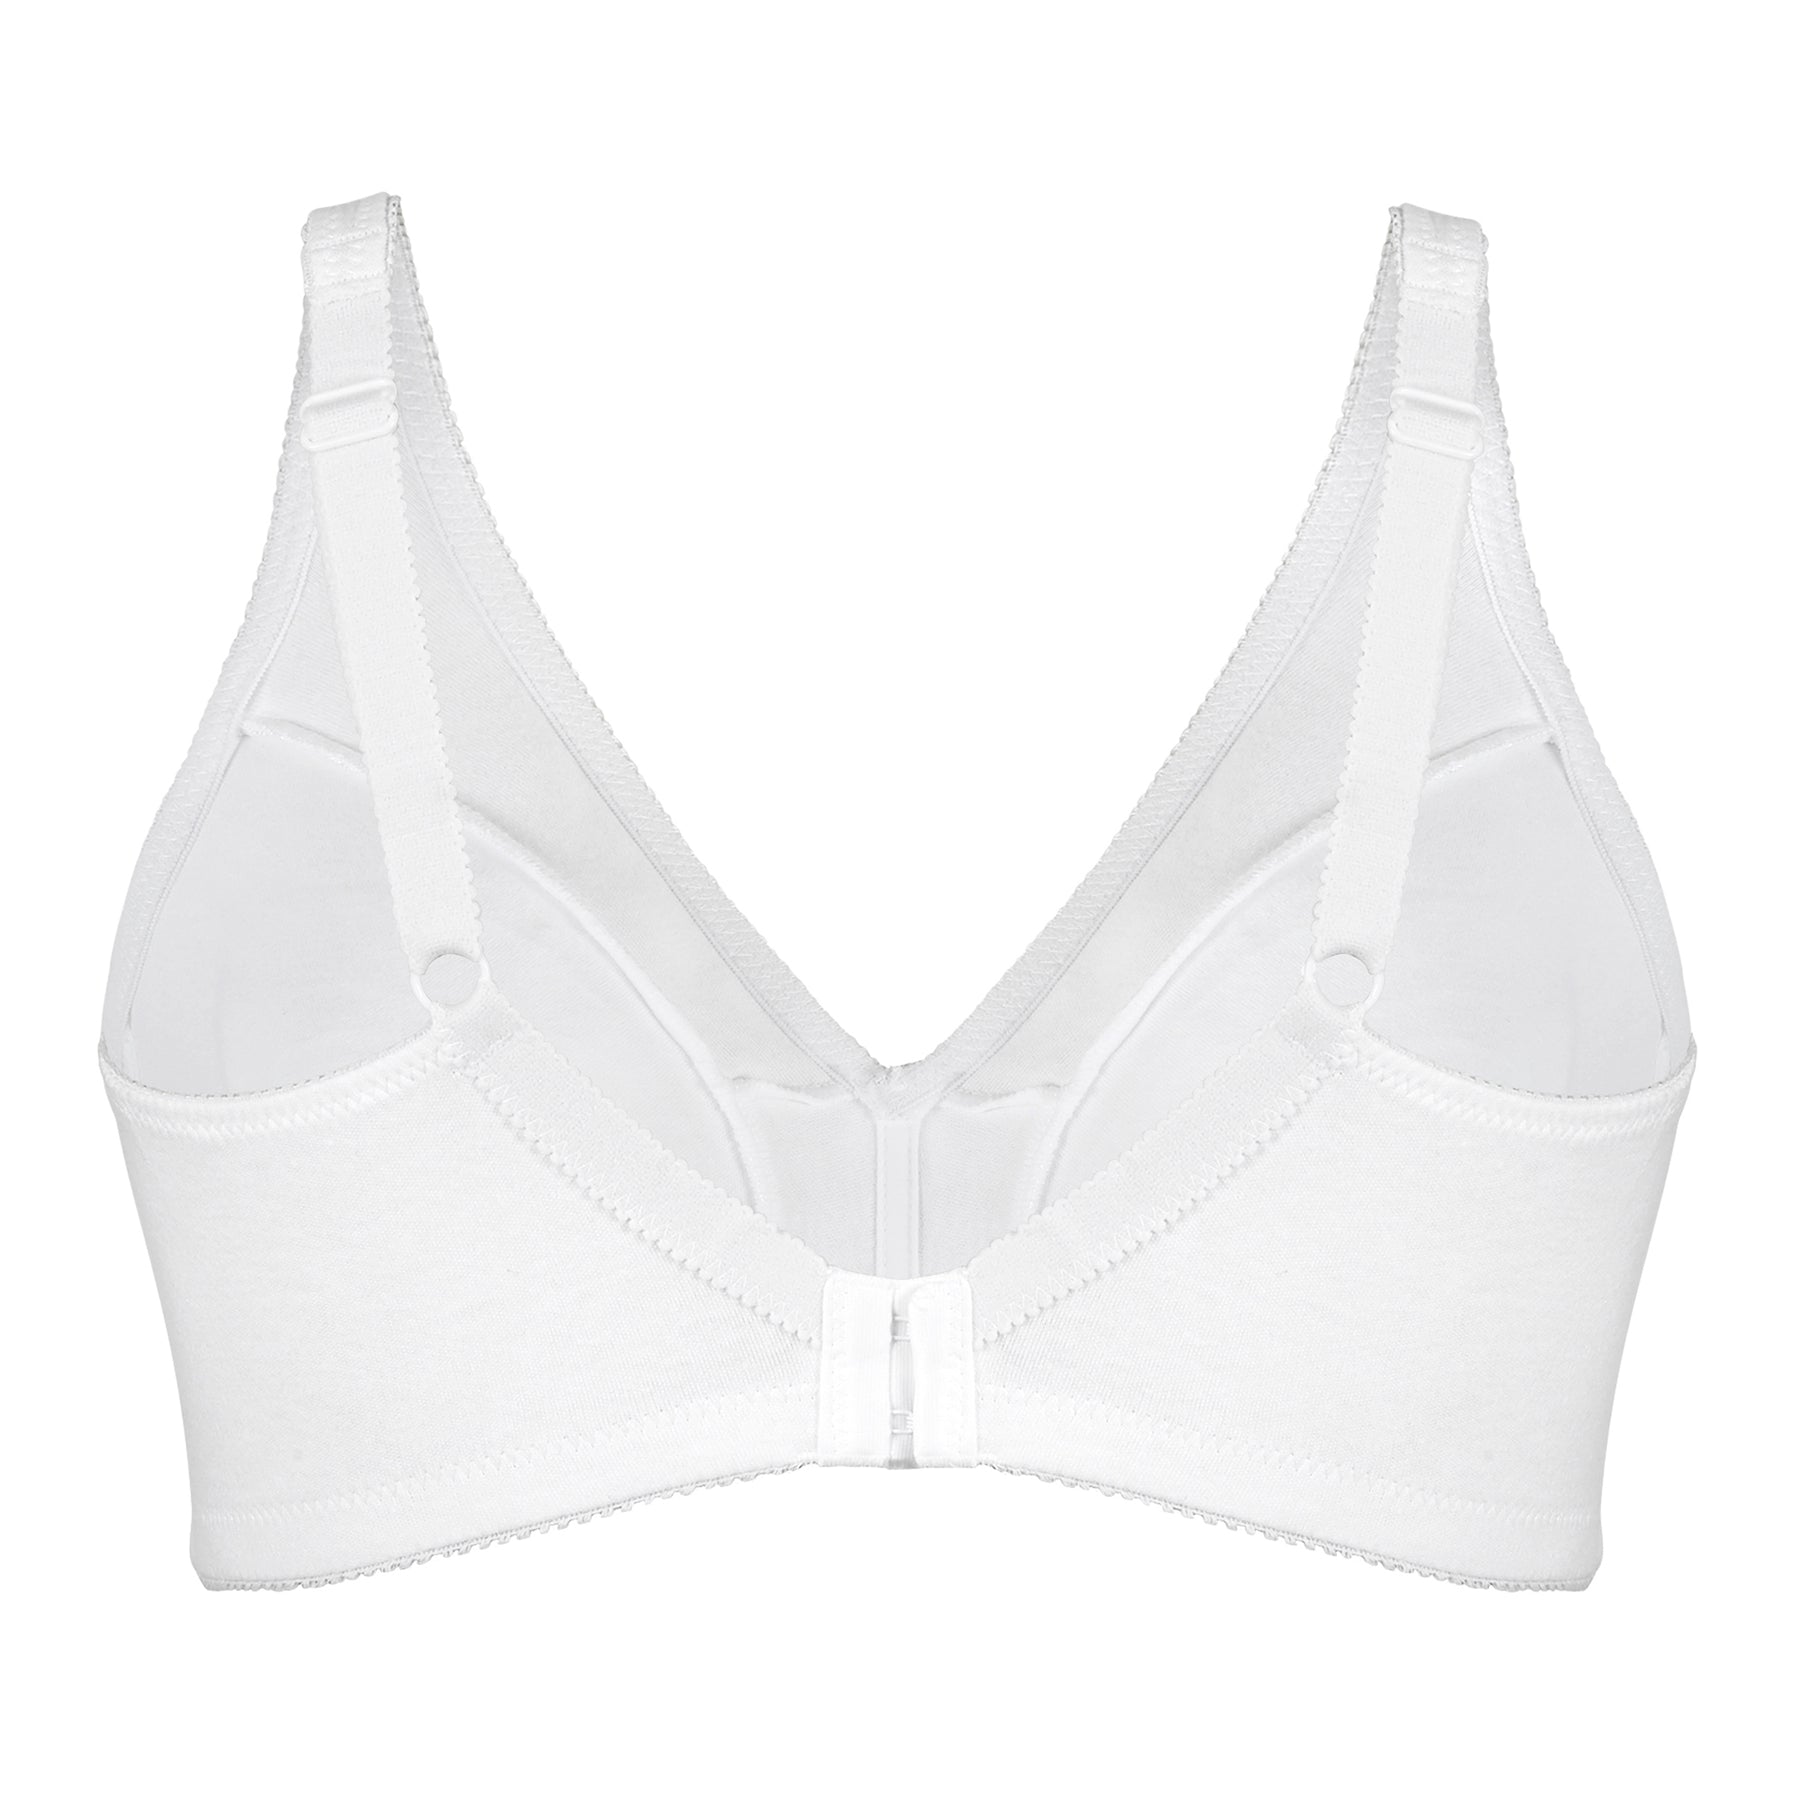 Wholesale c75 cup molded plain seamless bra For Supportive Underwear 